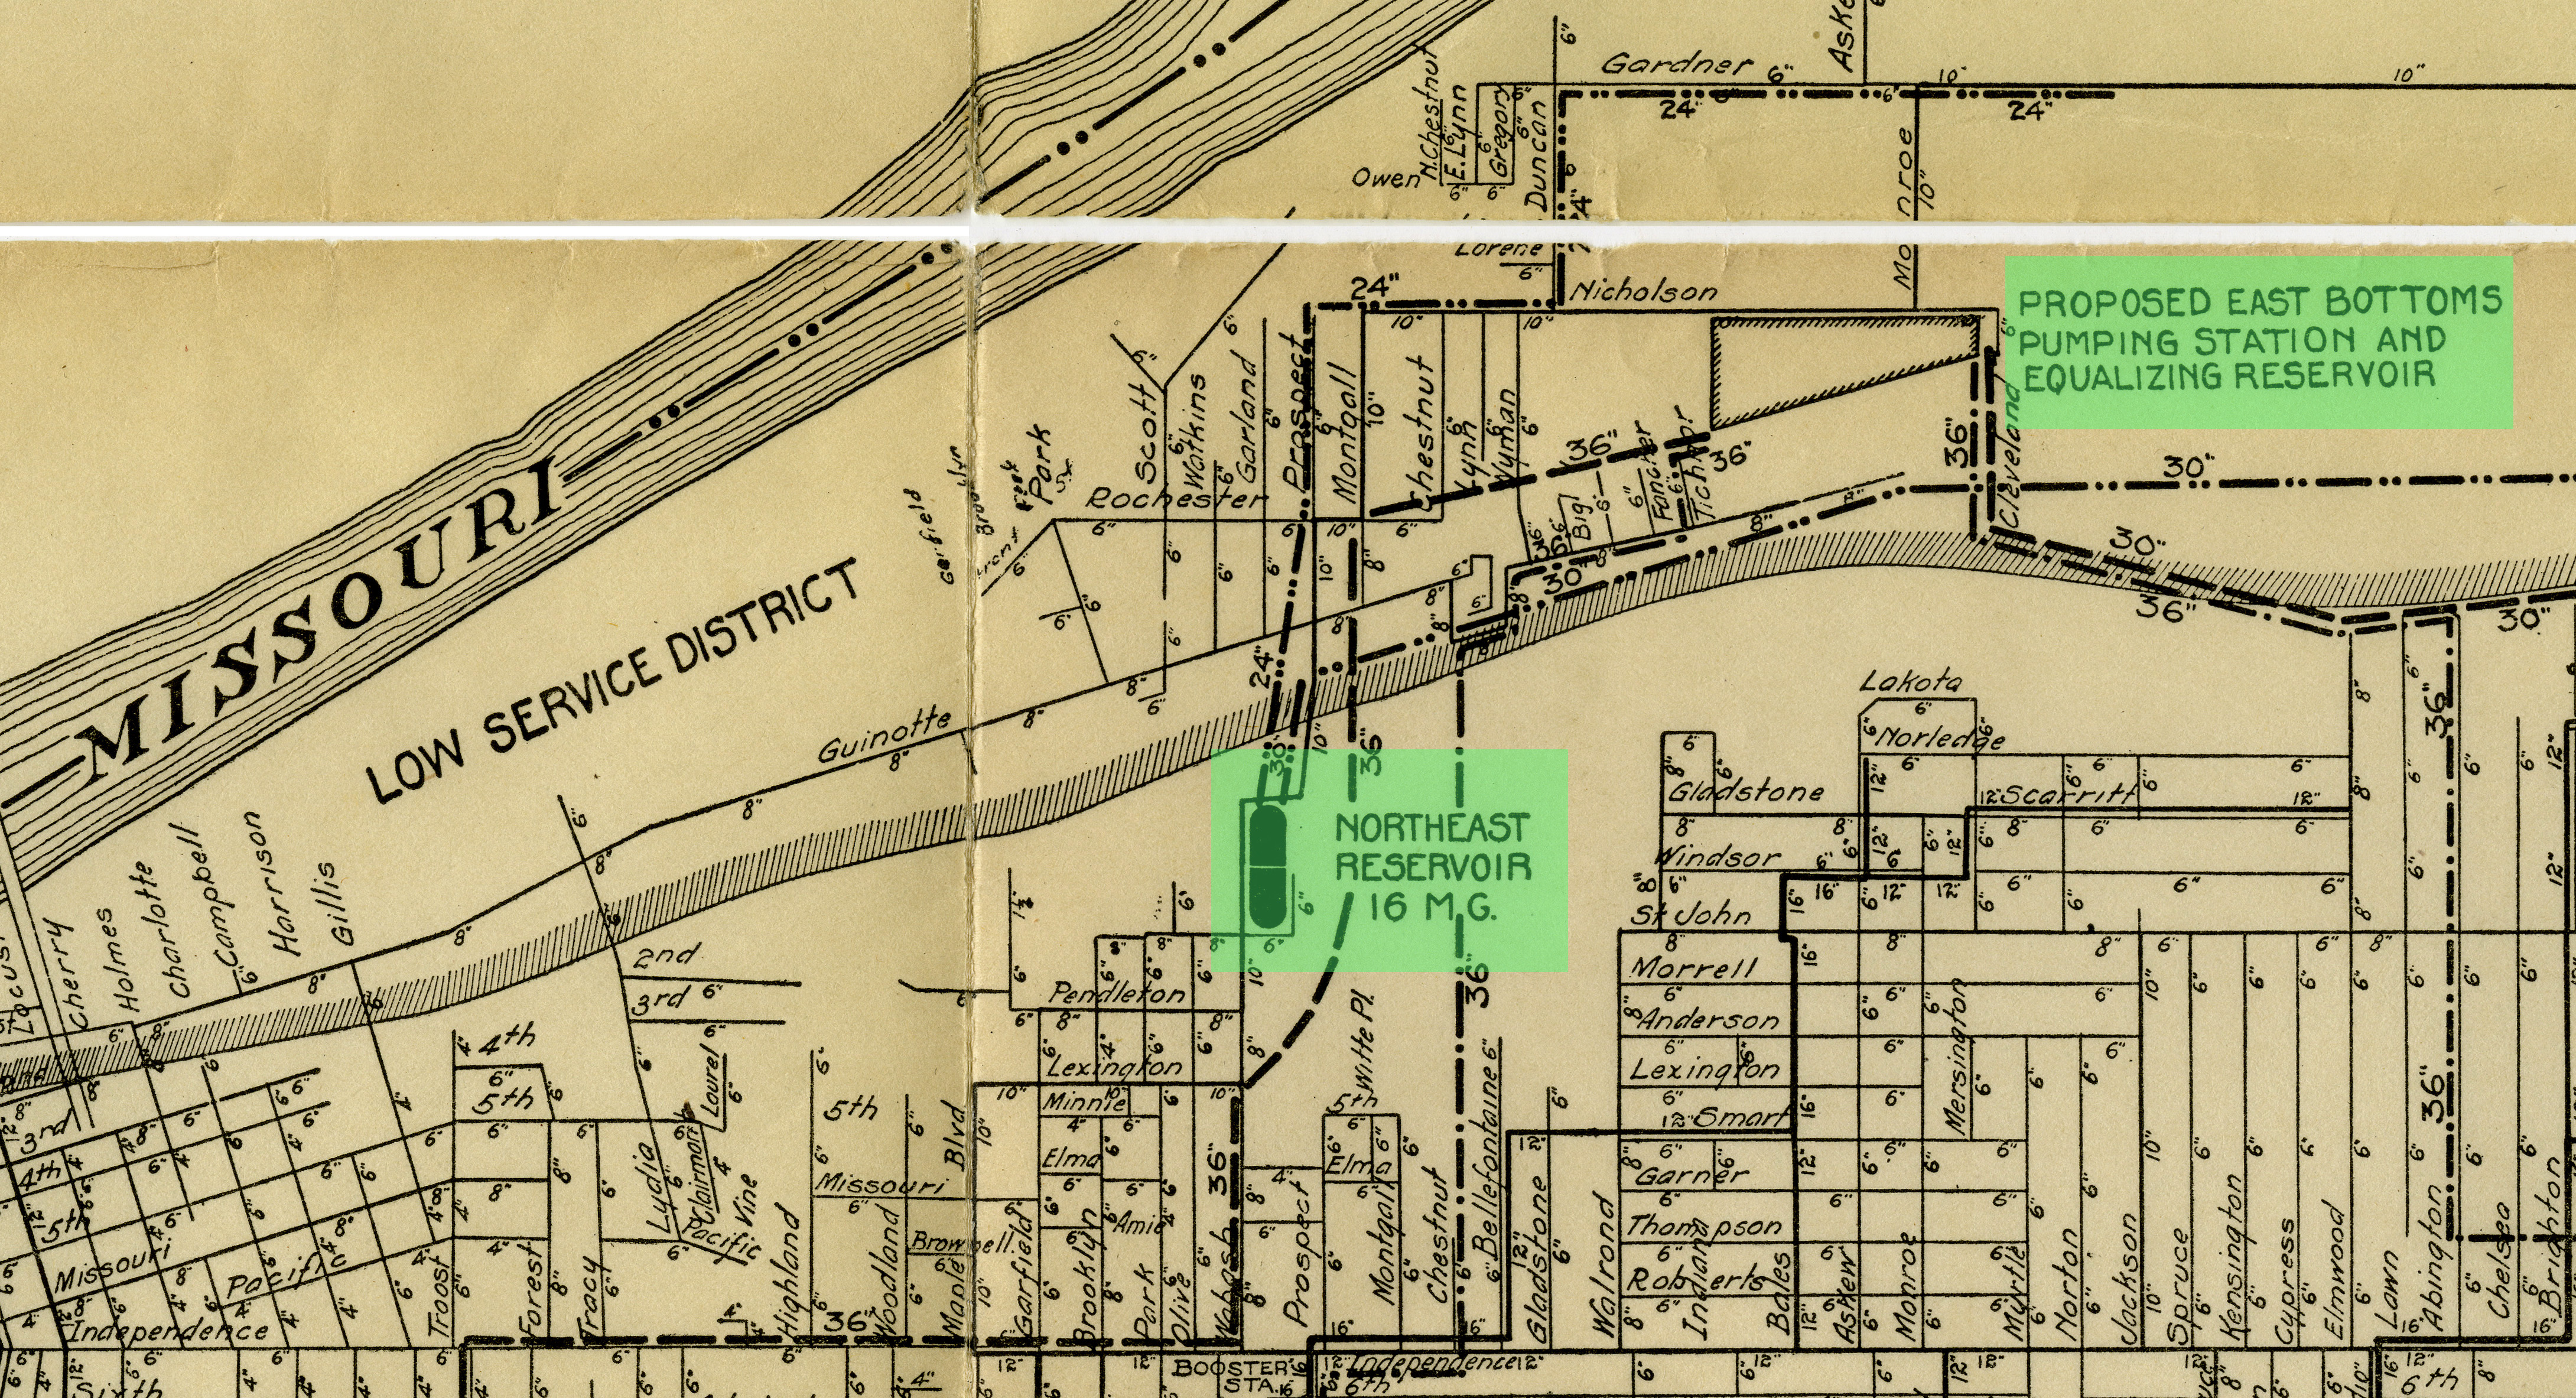 Map showing the location of the proposed East Bottoms pumping station in relation to the Northeast reservoir.